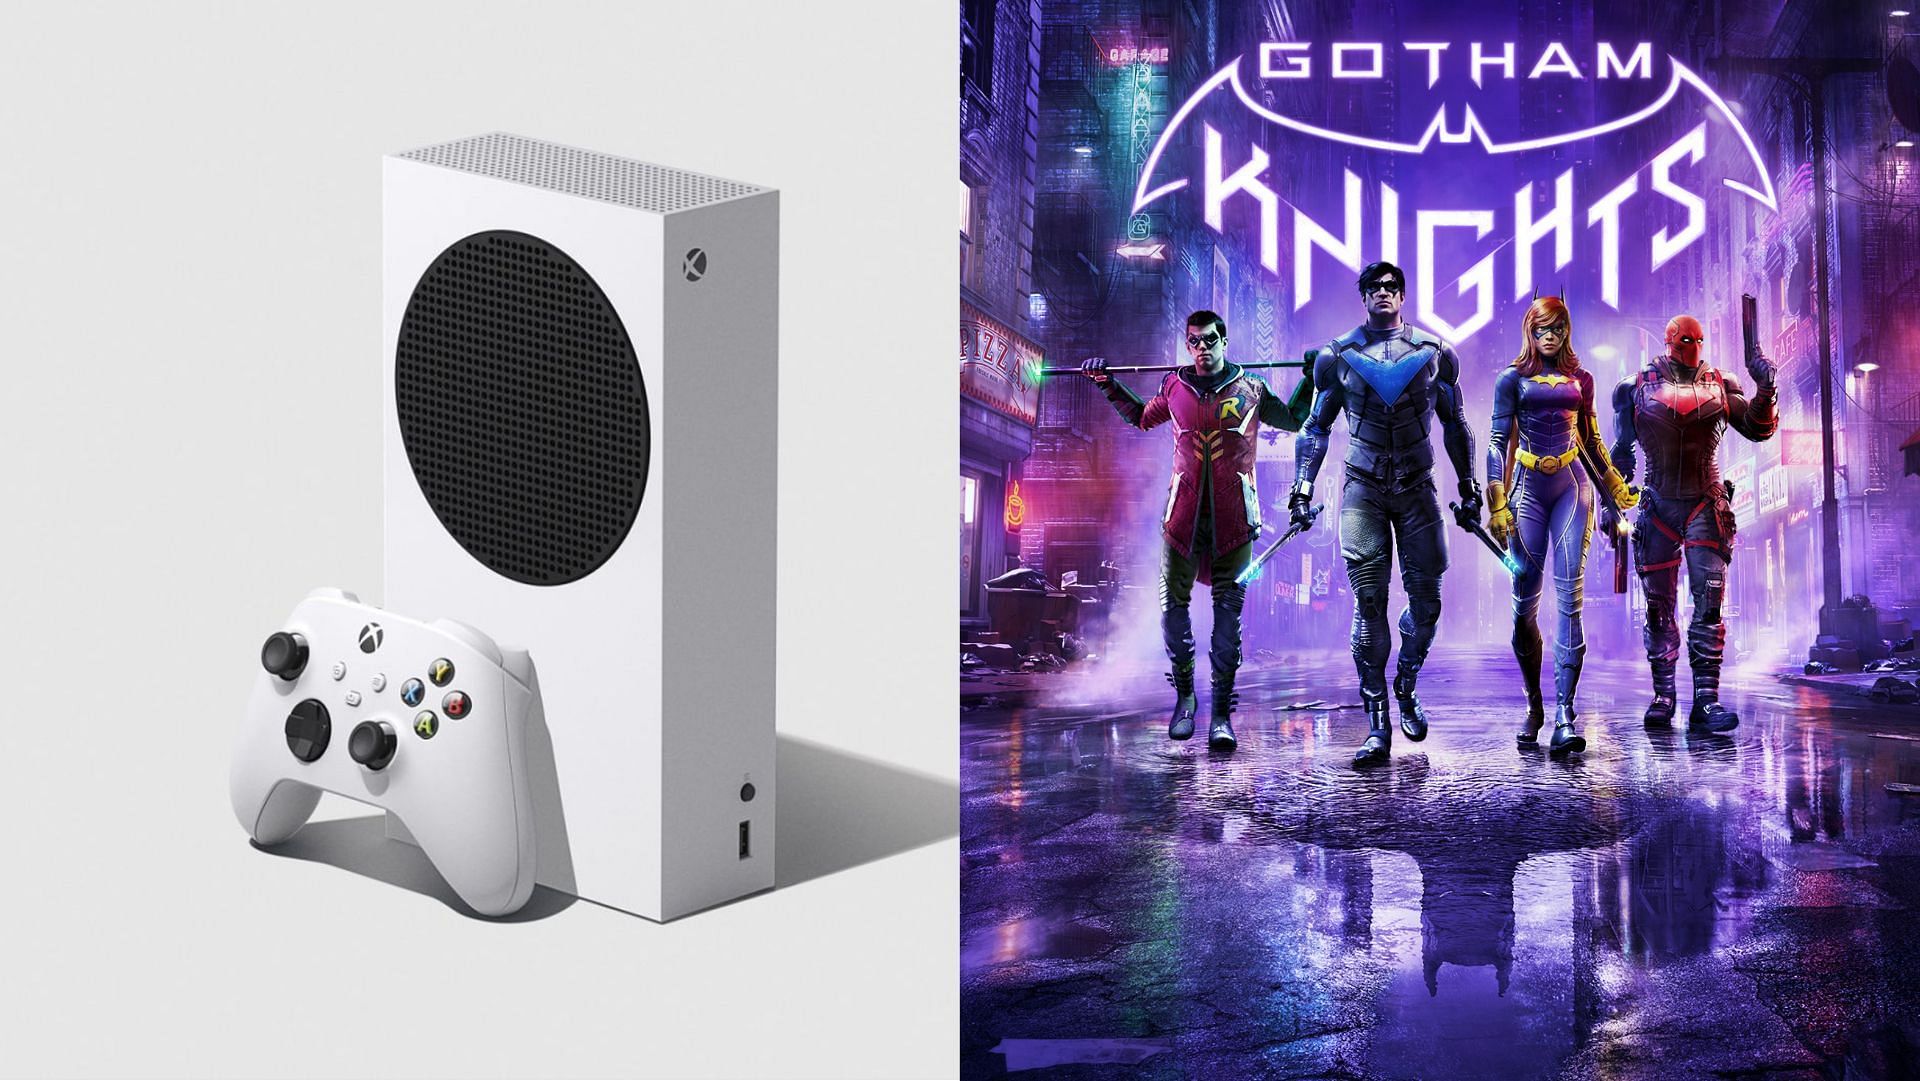 Games like Gotham Knights is also on sale along with the Series S console (Images via Xbox, WB)